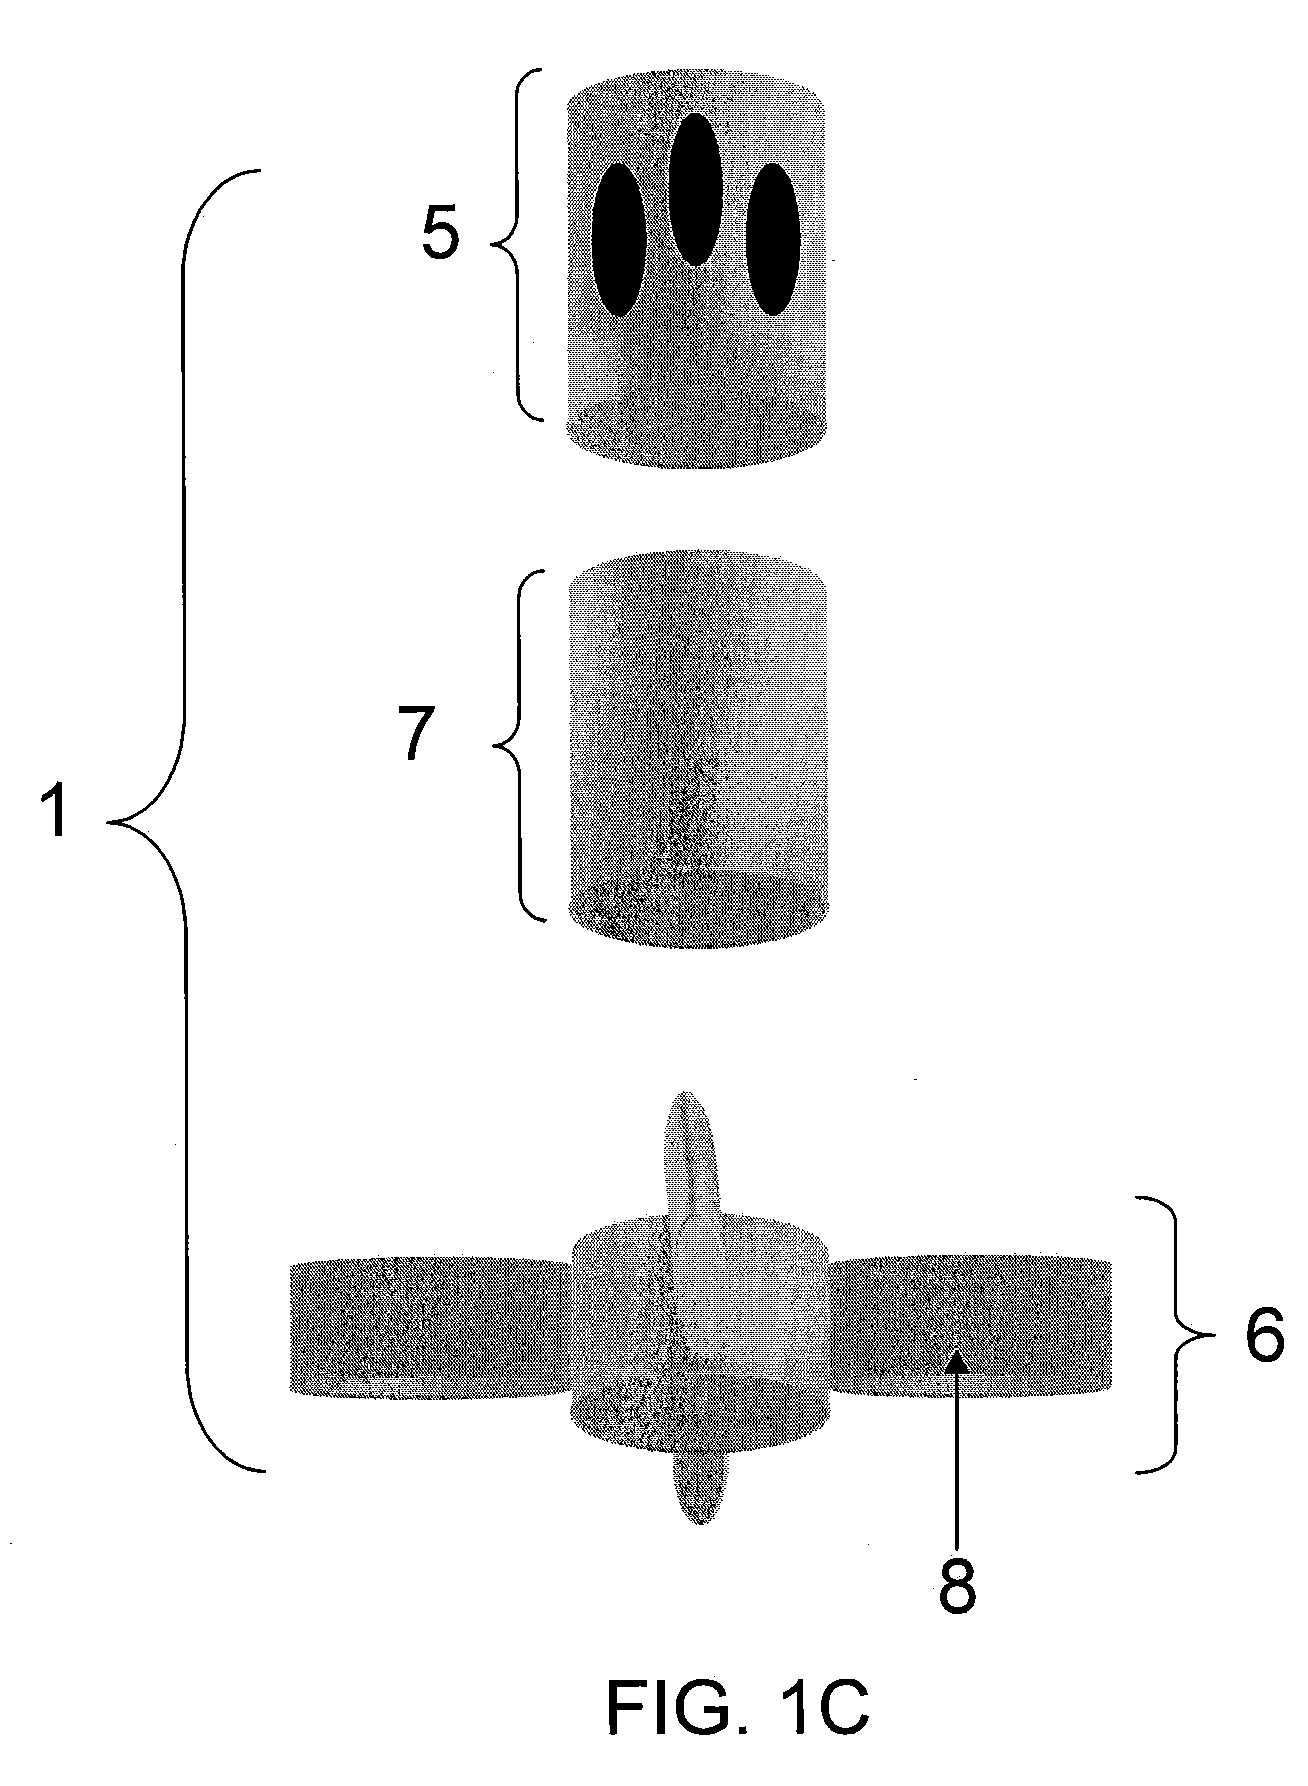 Hand and forearm strengthening device and methods of use